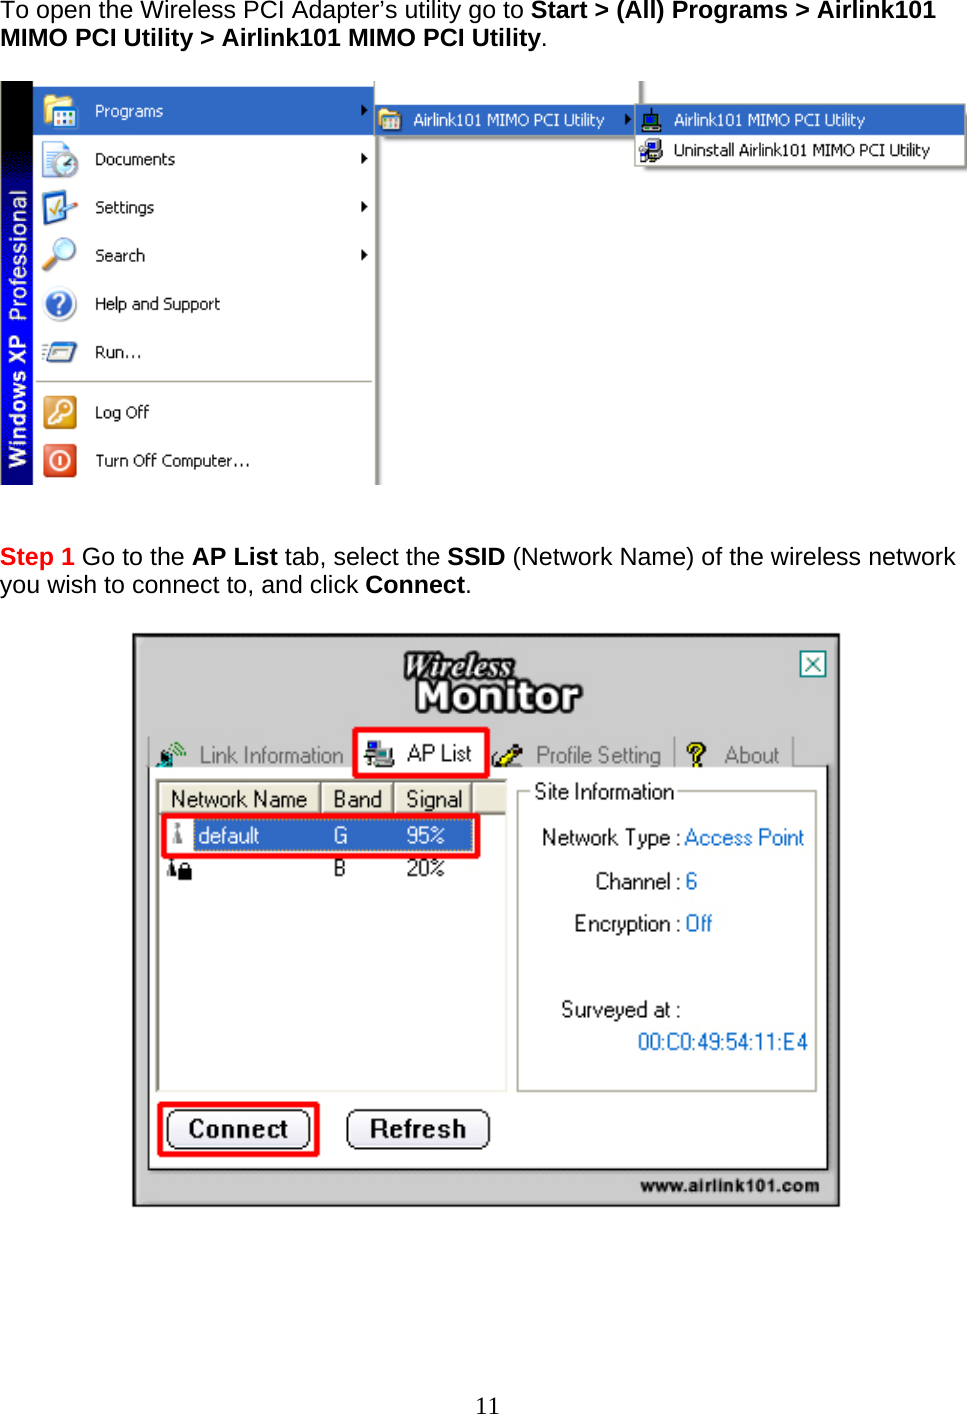 To open the Wireless PCI Adapter’s utility go to Start &gt; (All) Programs &gt; Airlink101 MIMO PCI Utility &gt; Airlink101 MIMO PCI Utility.     Step 1 Go to the AP List tab, select the SSID (Network Name) of the wireless network you wish to connect to, and click Connect.       11 